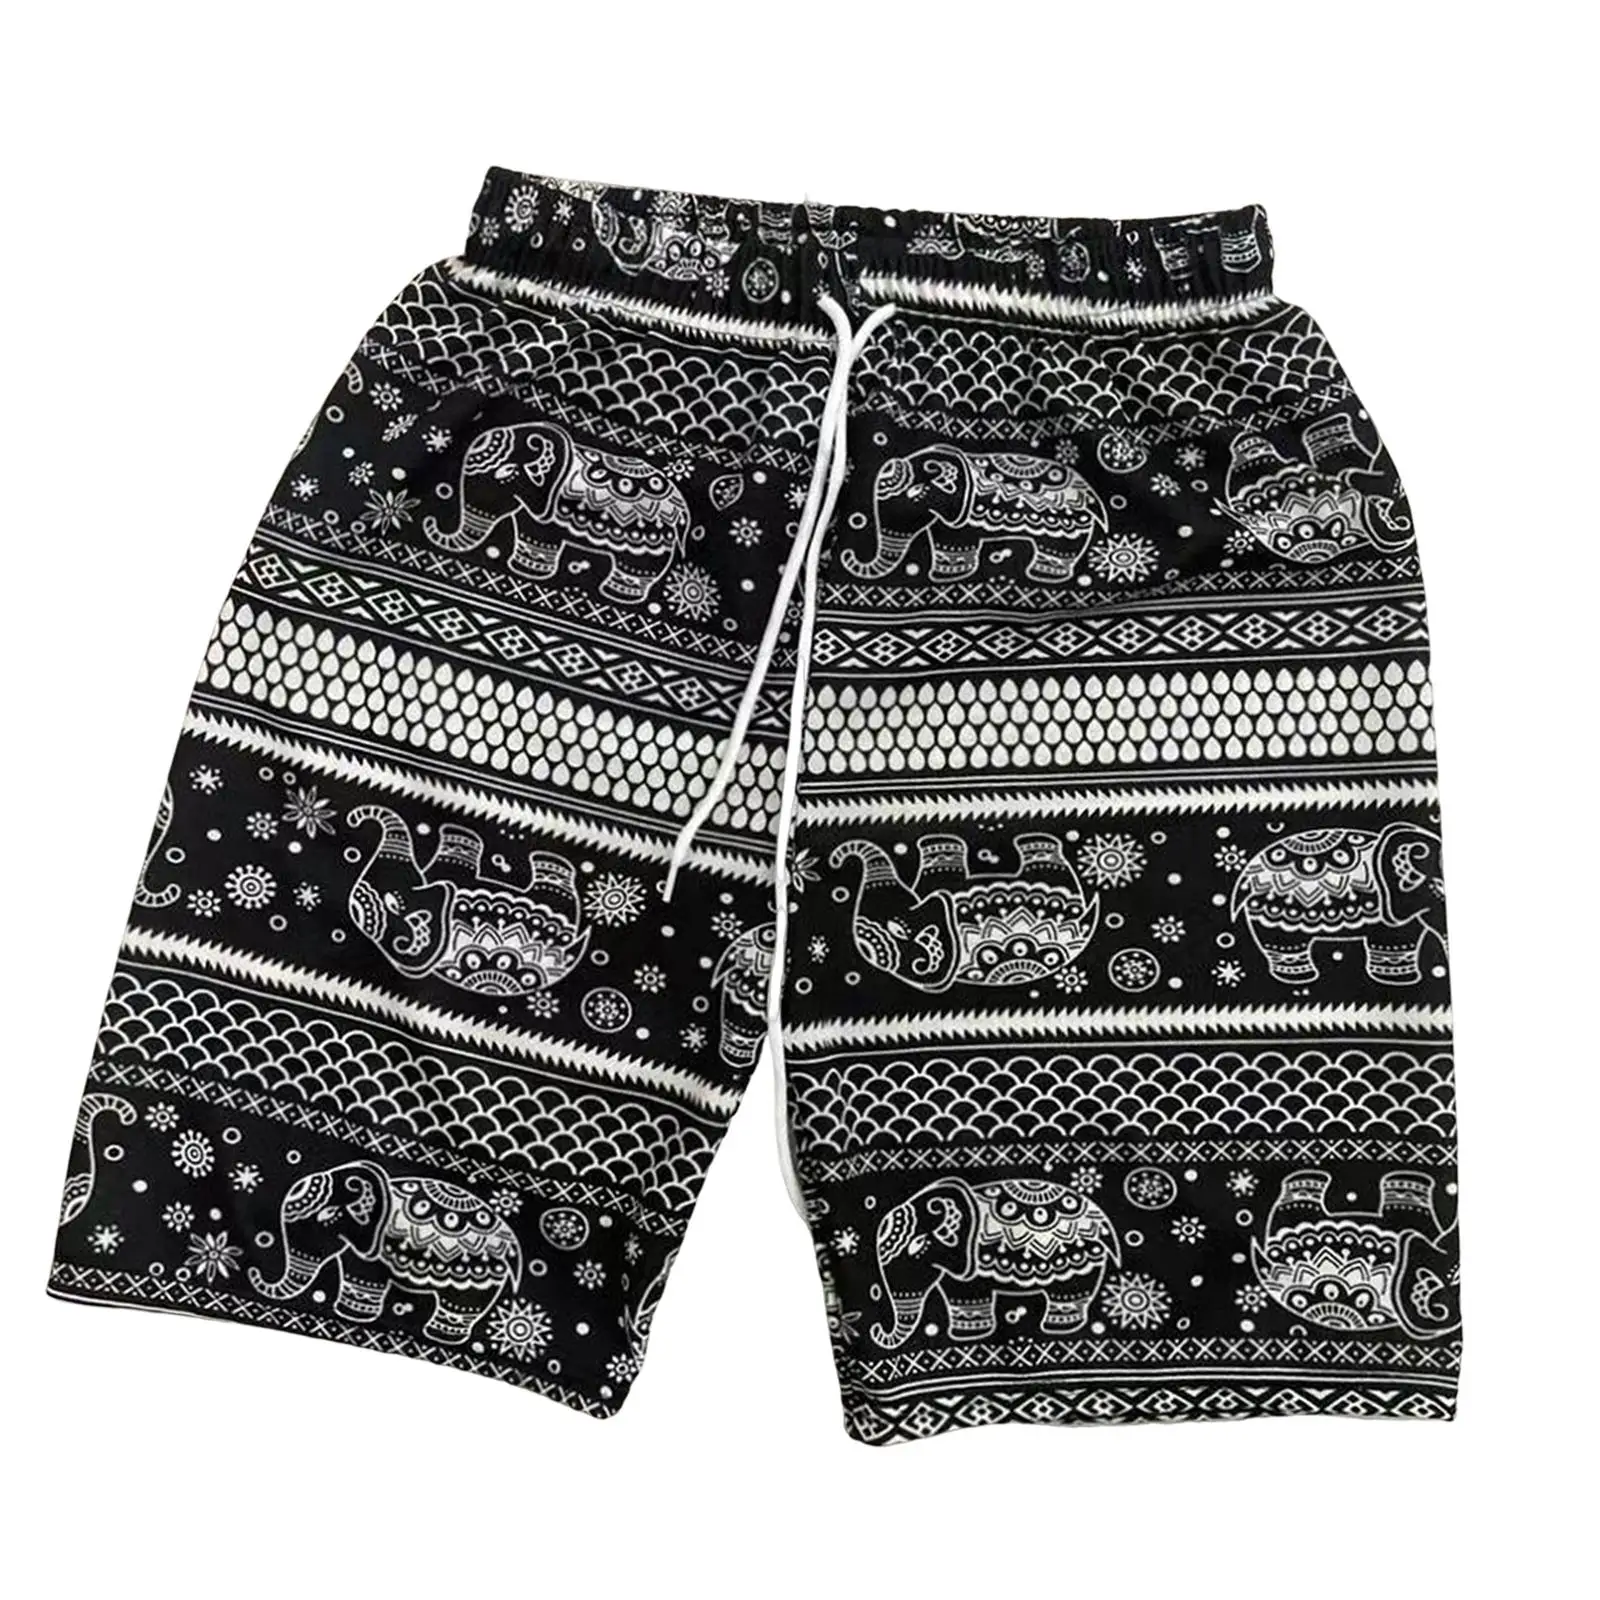 Beach Shorts for Men Women Summer Polyester Lightweight Baggy Briefs Fashion Elephant Printed Short Pants for Party Ladies